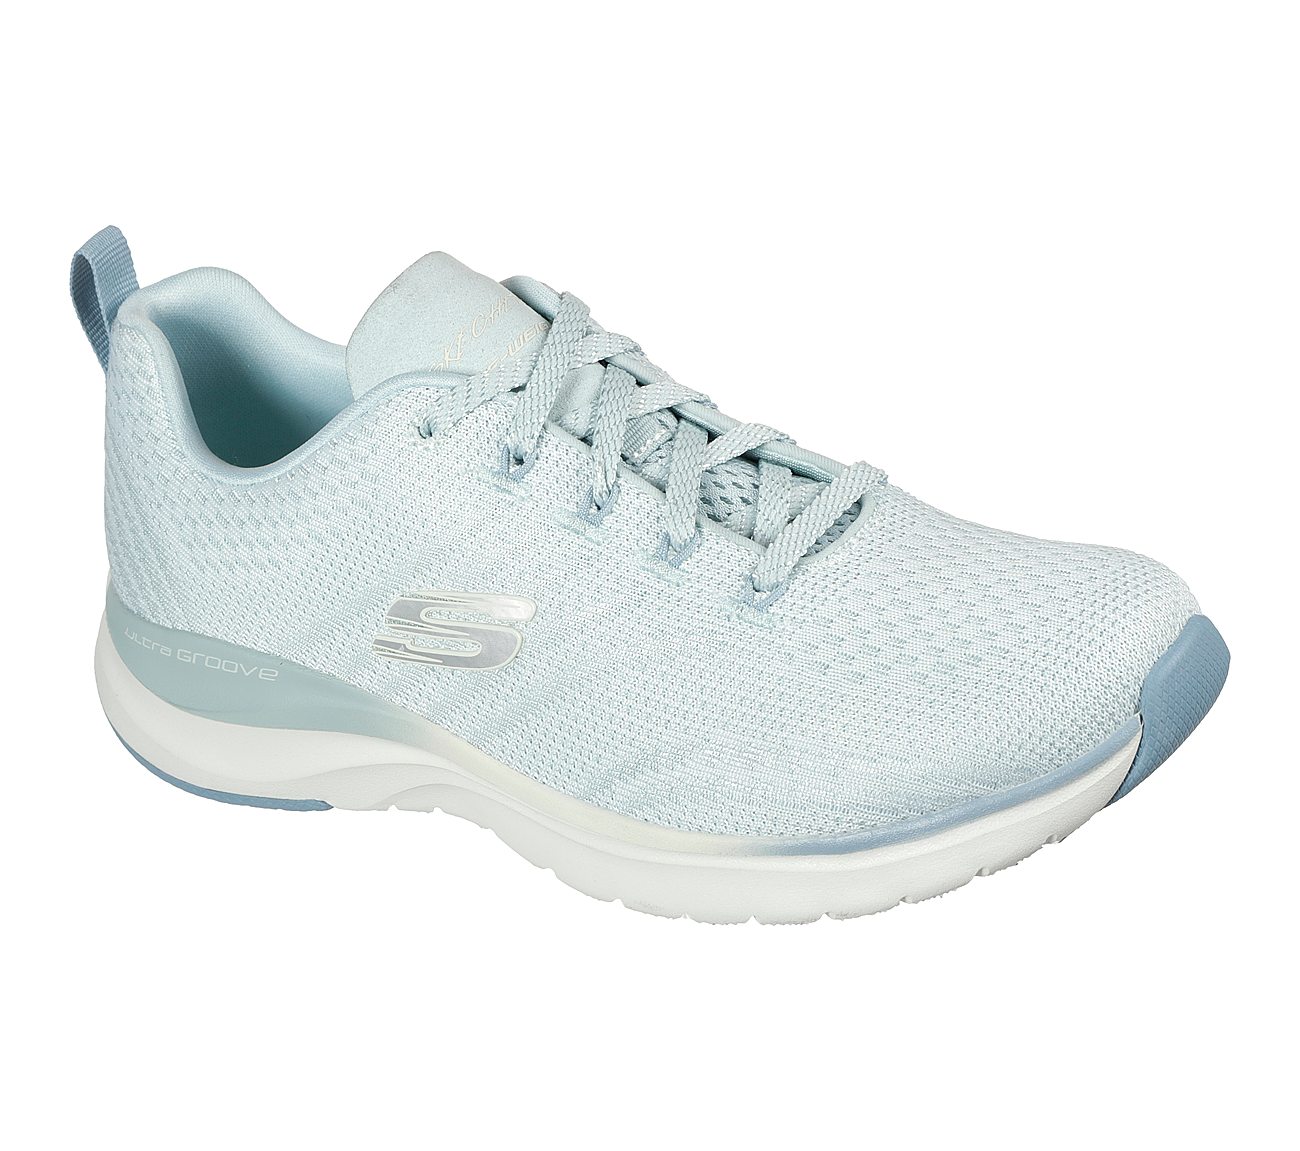 ULTRA GROOVE - PURE VISION, LLIGHT BLUE Footwear Lateral View